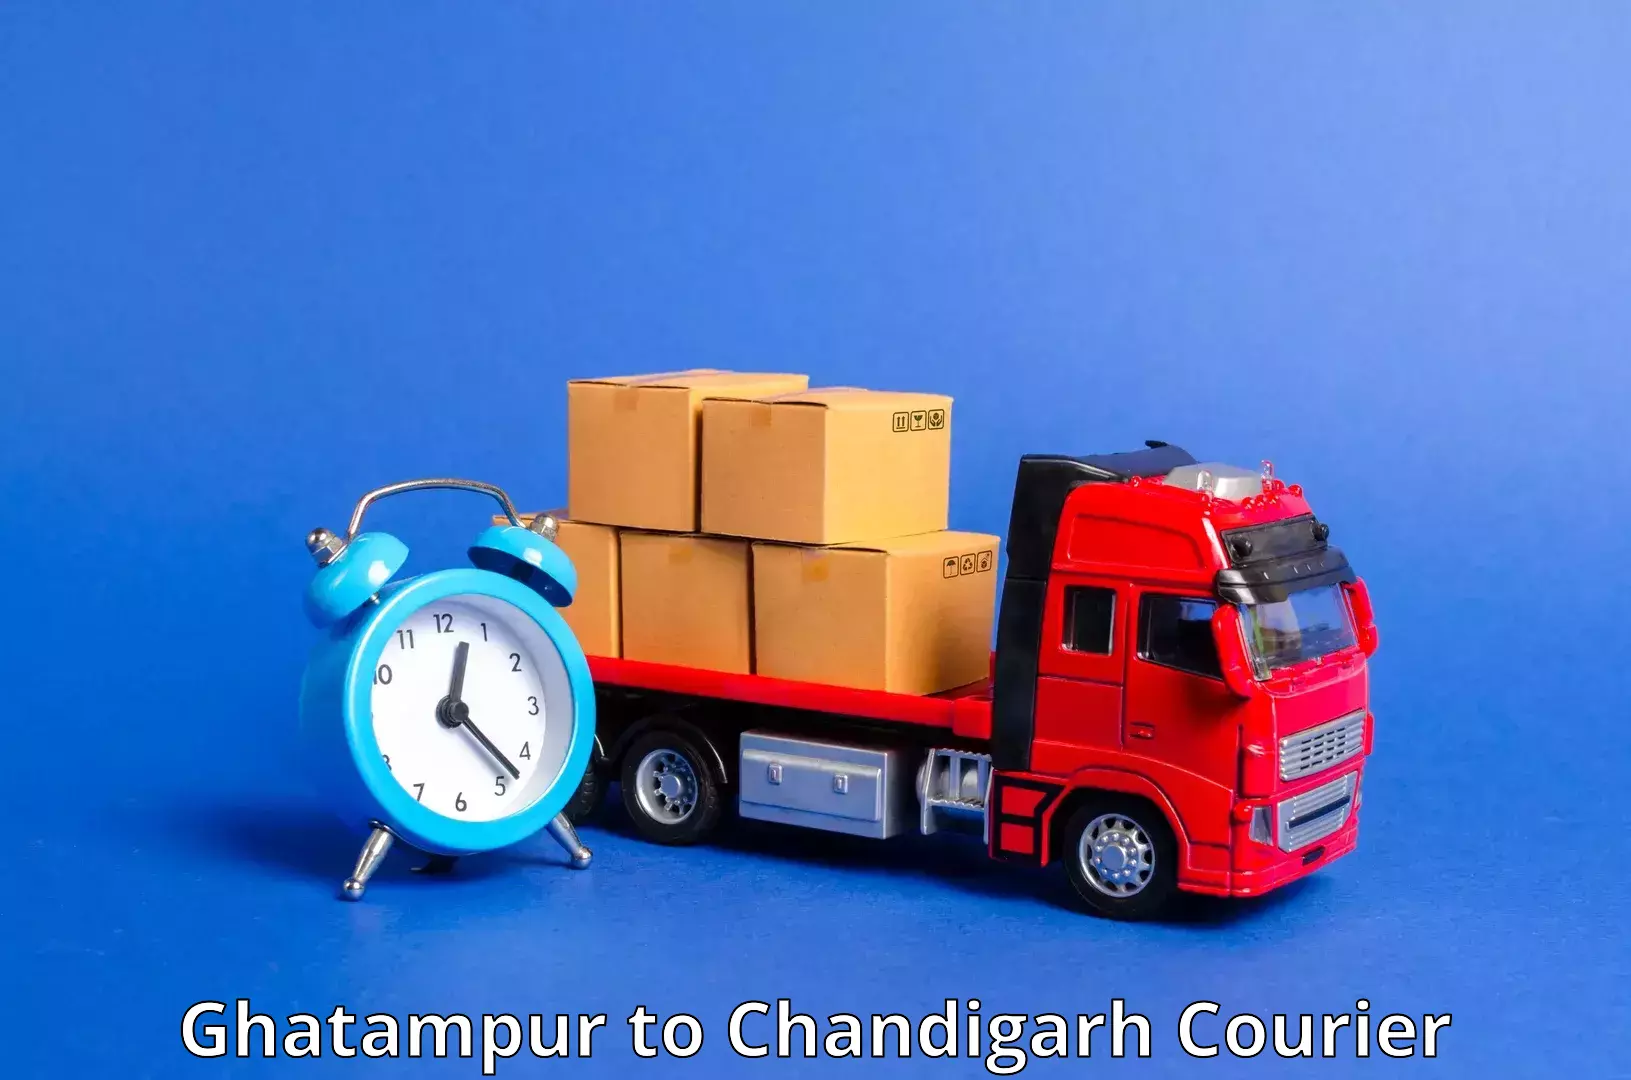 Overnight delivery services in Ghatampur to Chandigarh